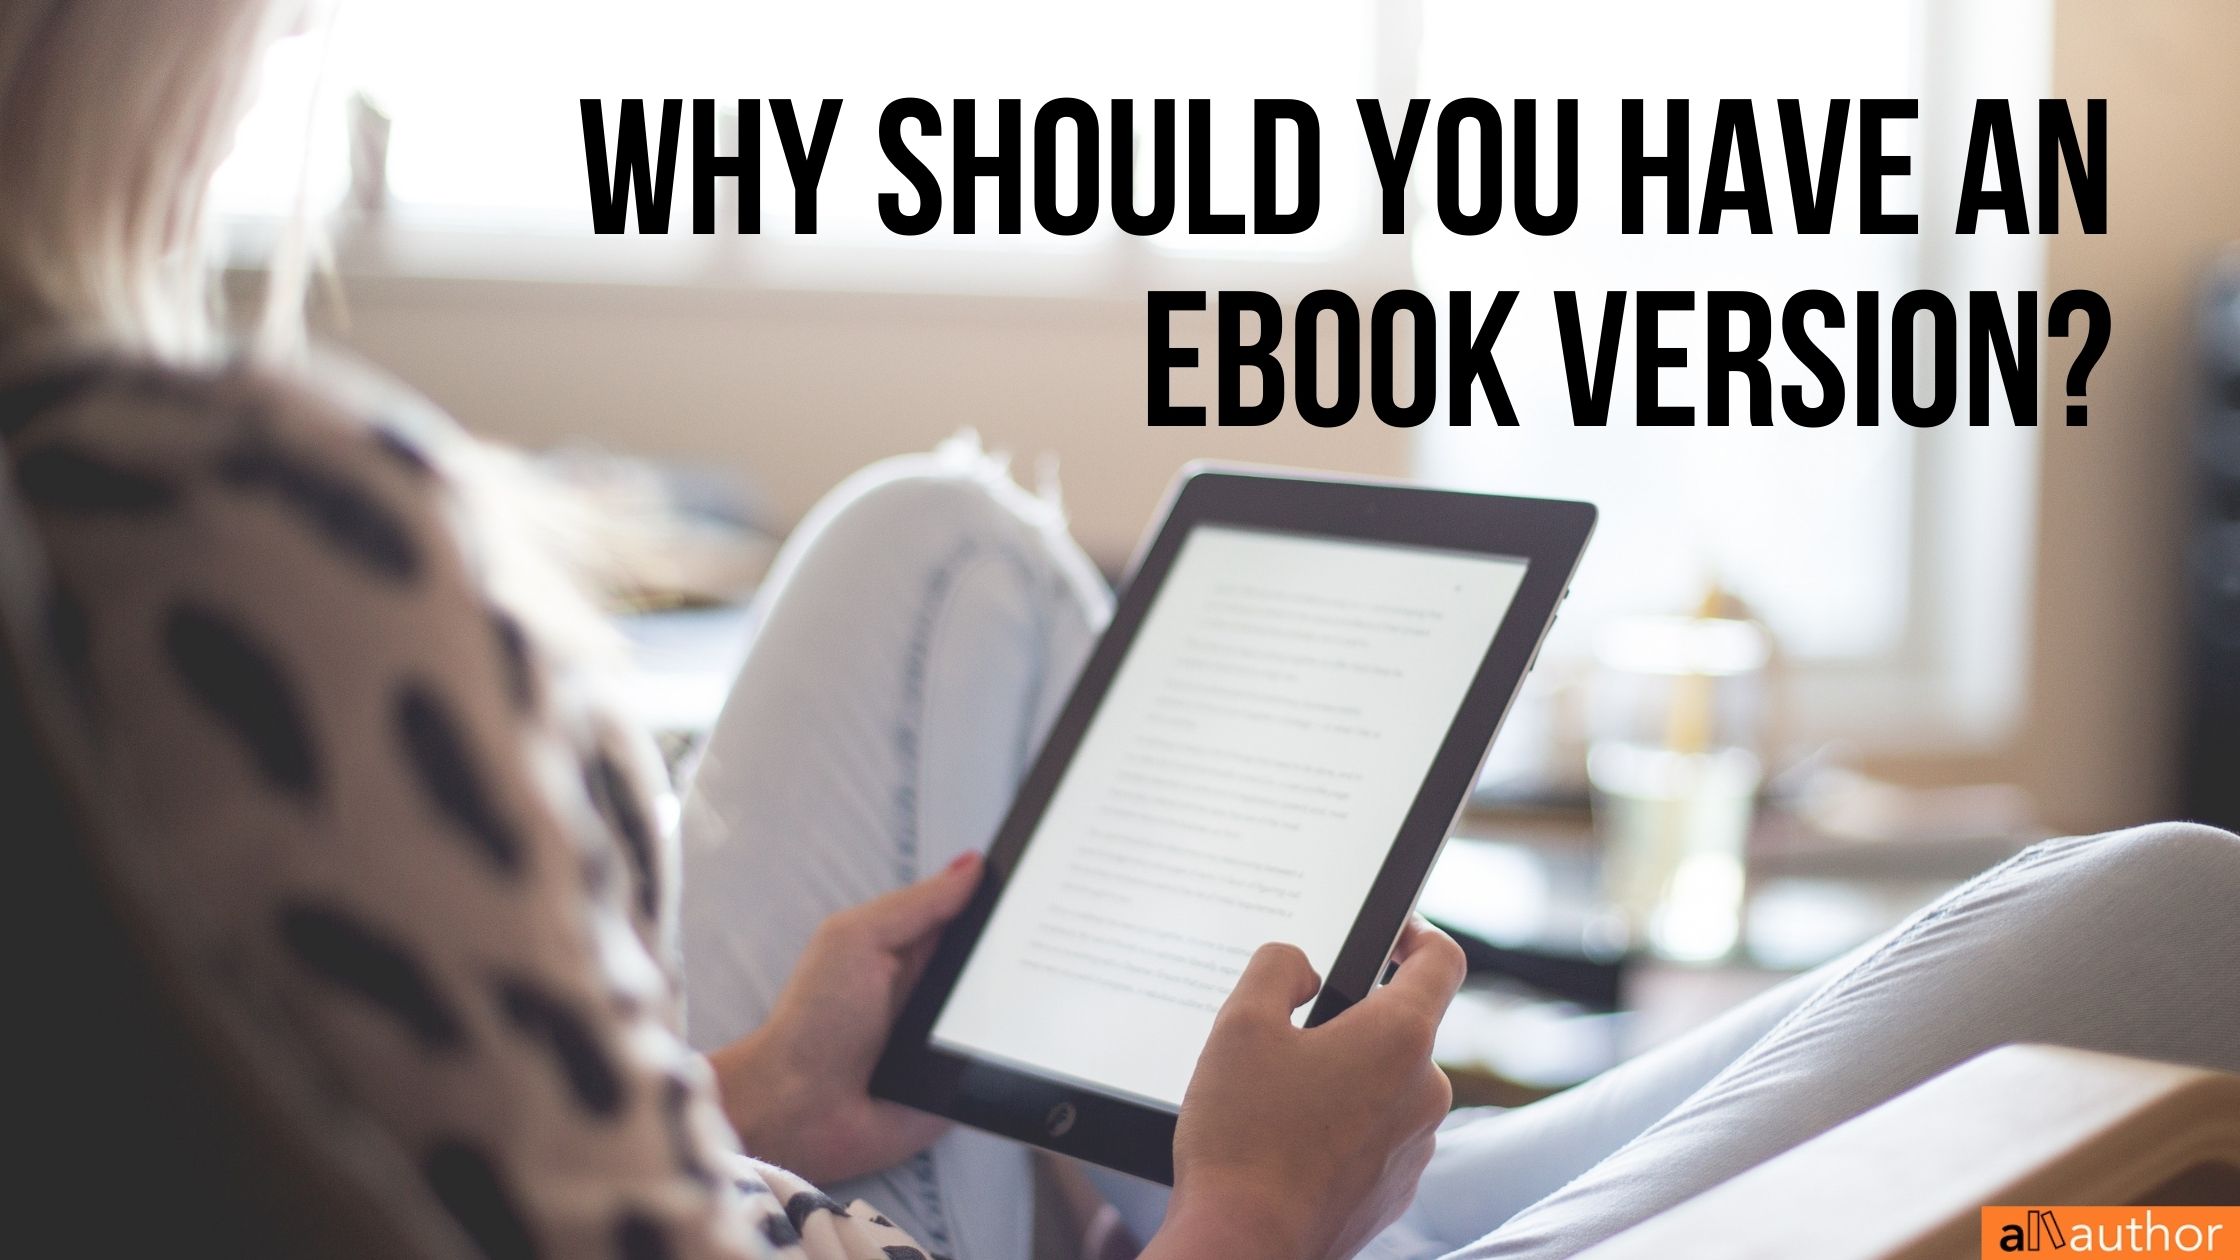 Why Should You Have an eBook Version?